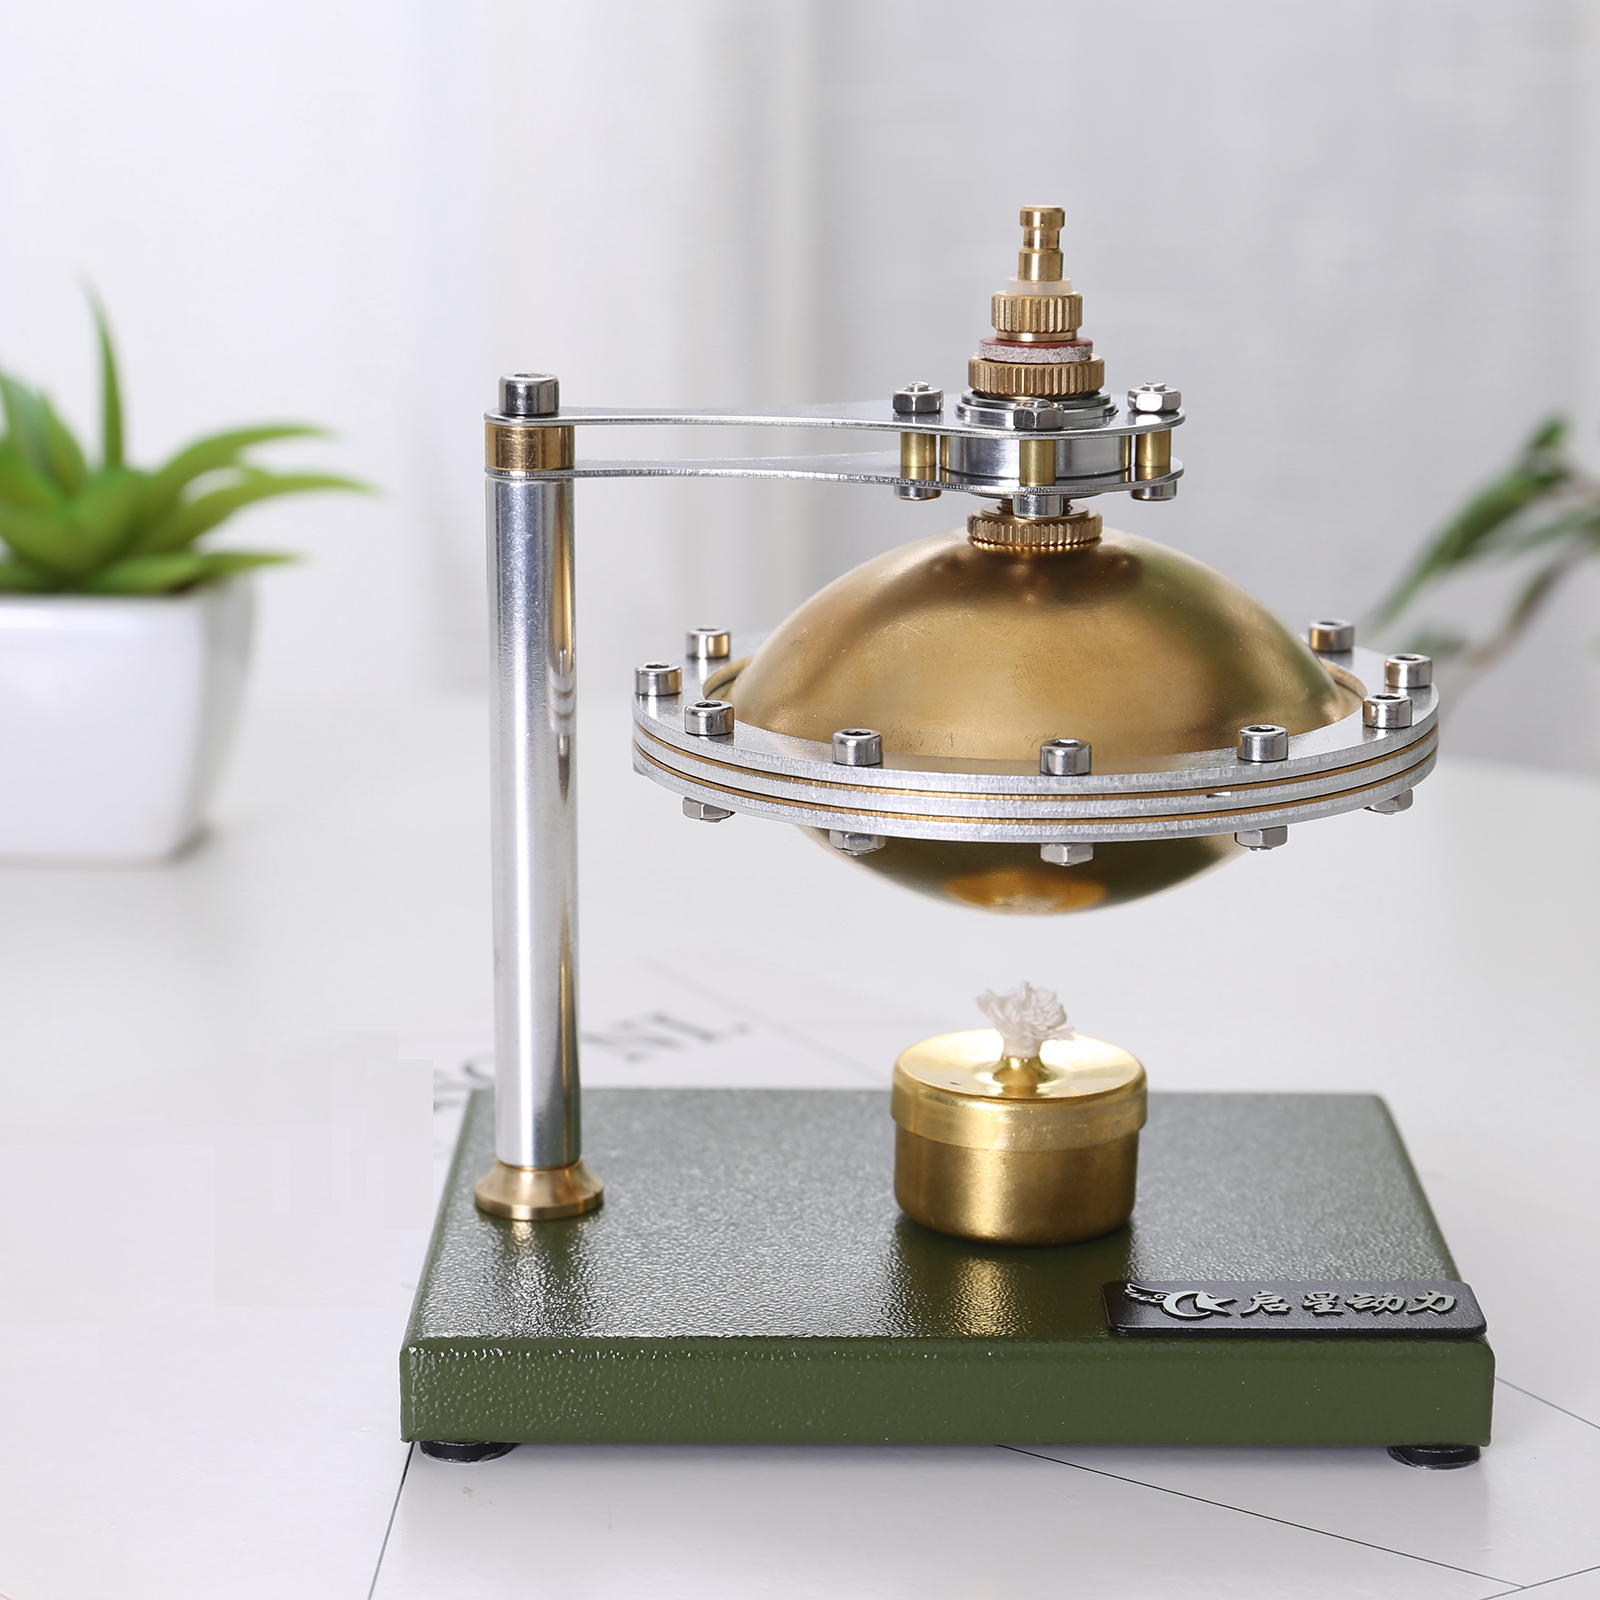 UFO Spin Suspension Hot Air Stirling Engine Motor Steam Heat Electricity Generator Machine Education Model Toy Kits